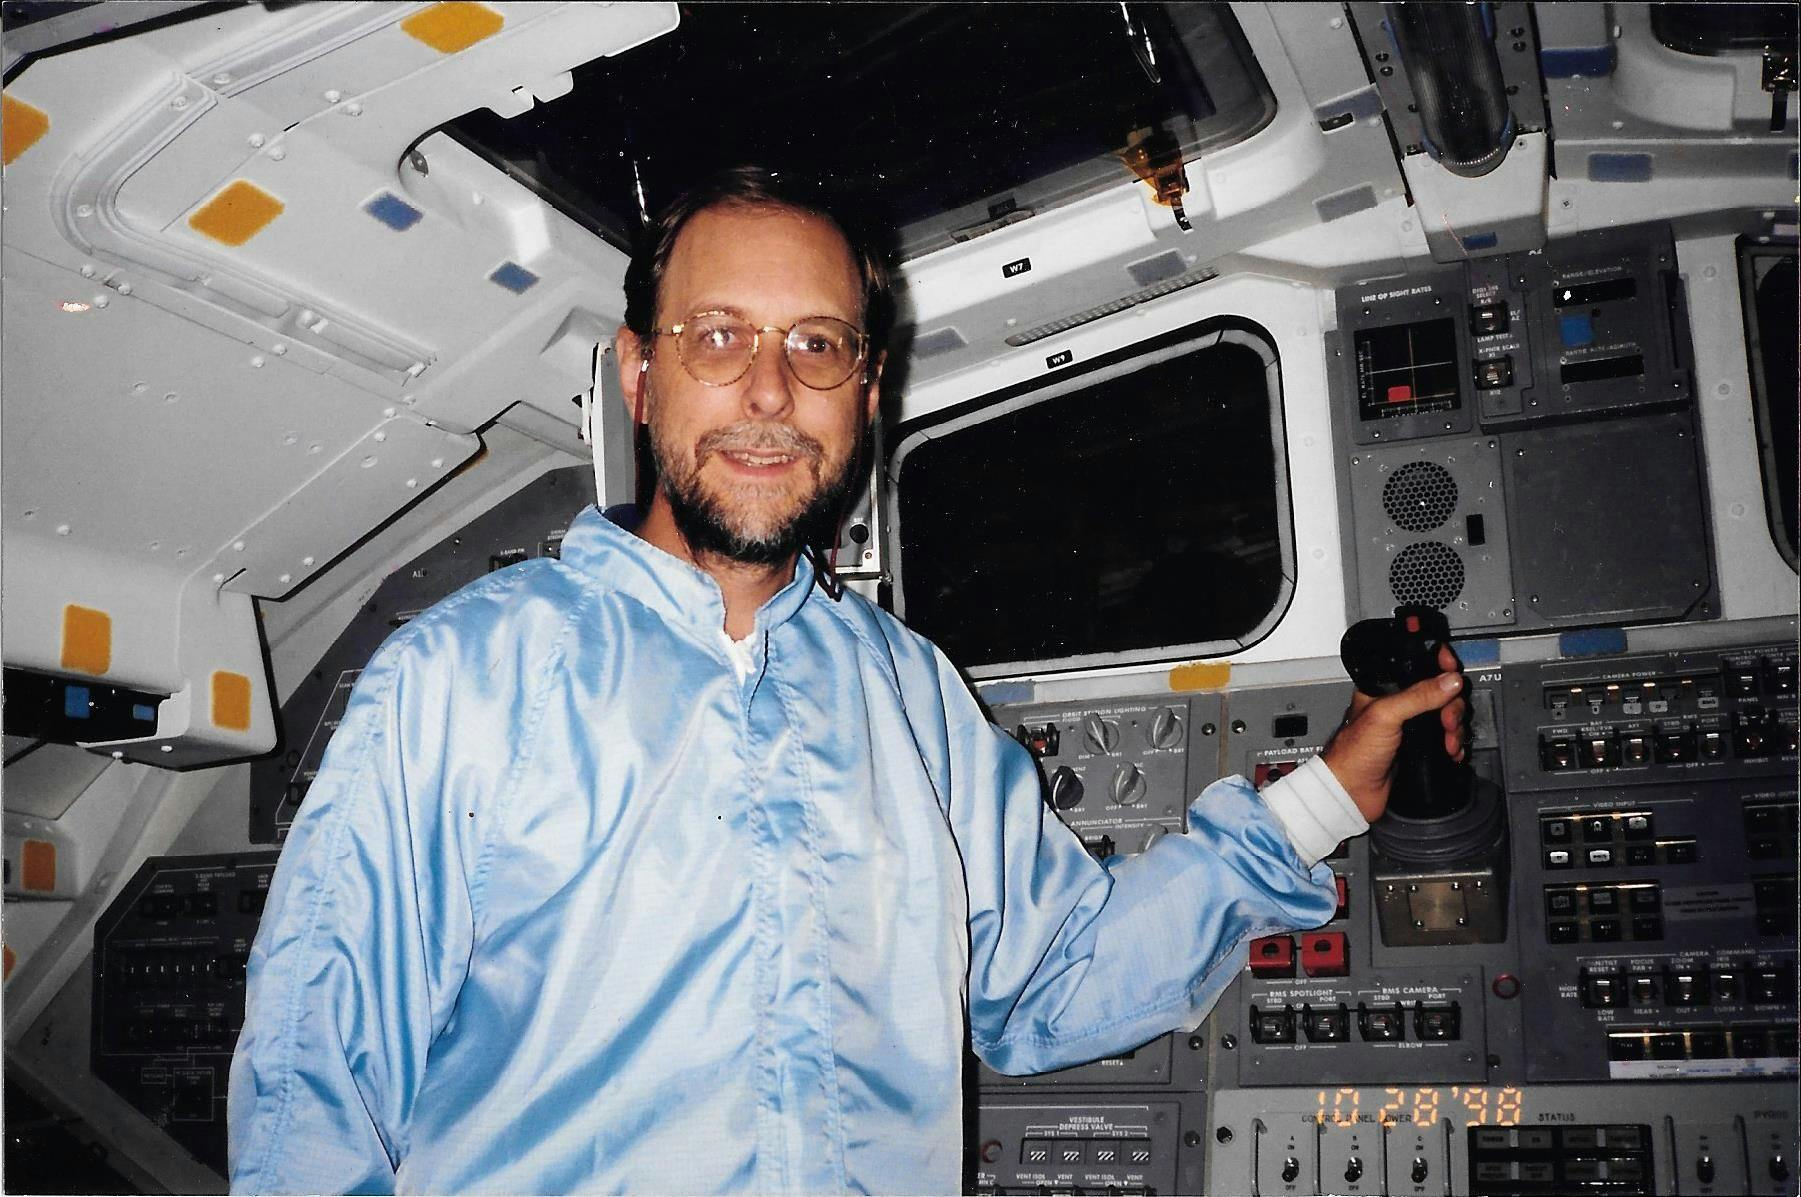 On the flight deck of the Orbiter Atlantis, in a rare shot without an 